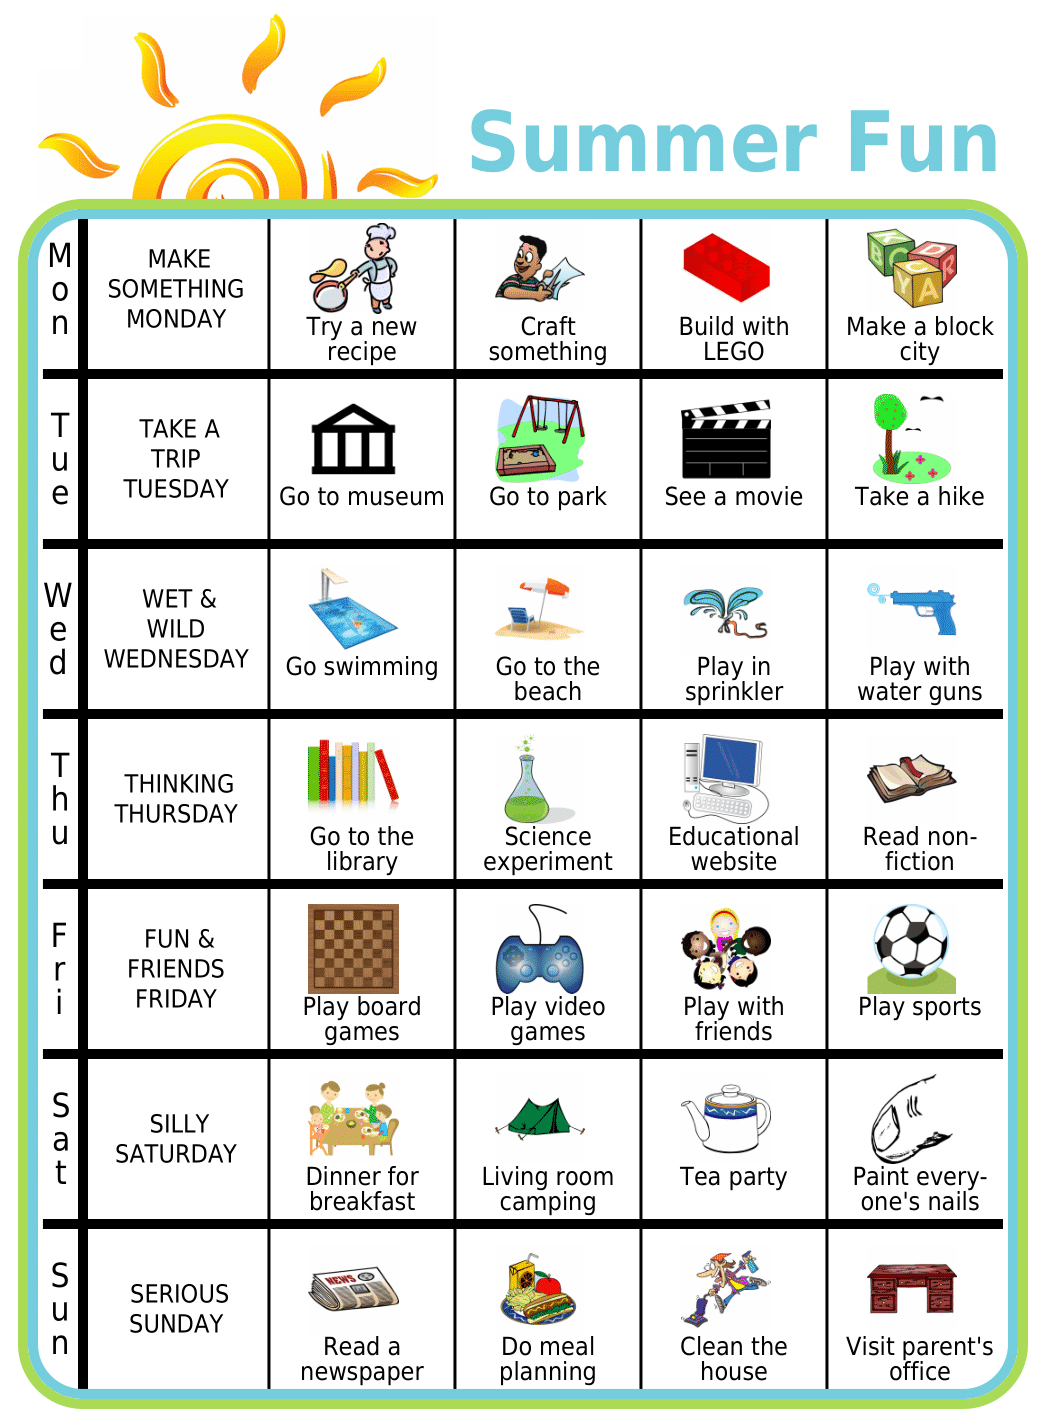 Picture checklists of a schedule for summer days with kids